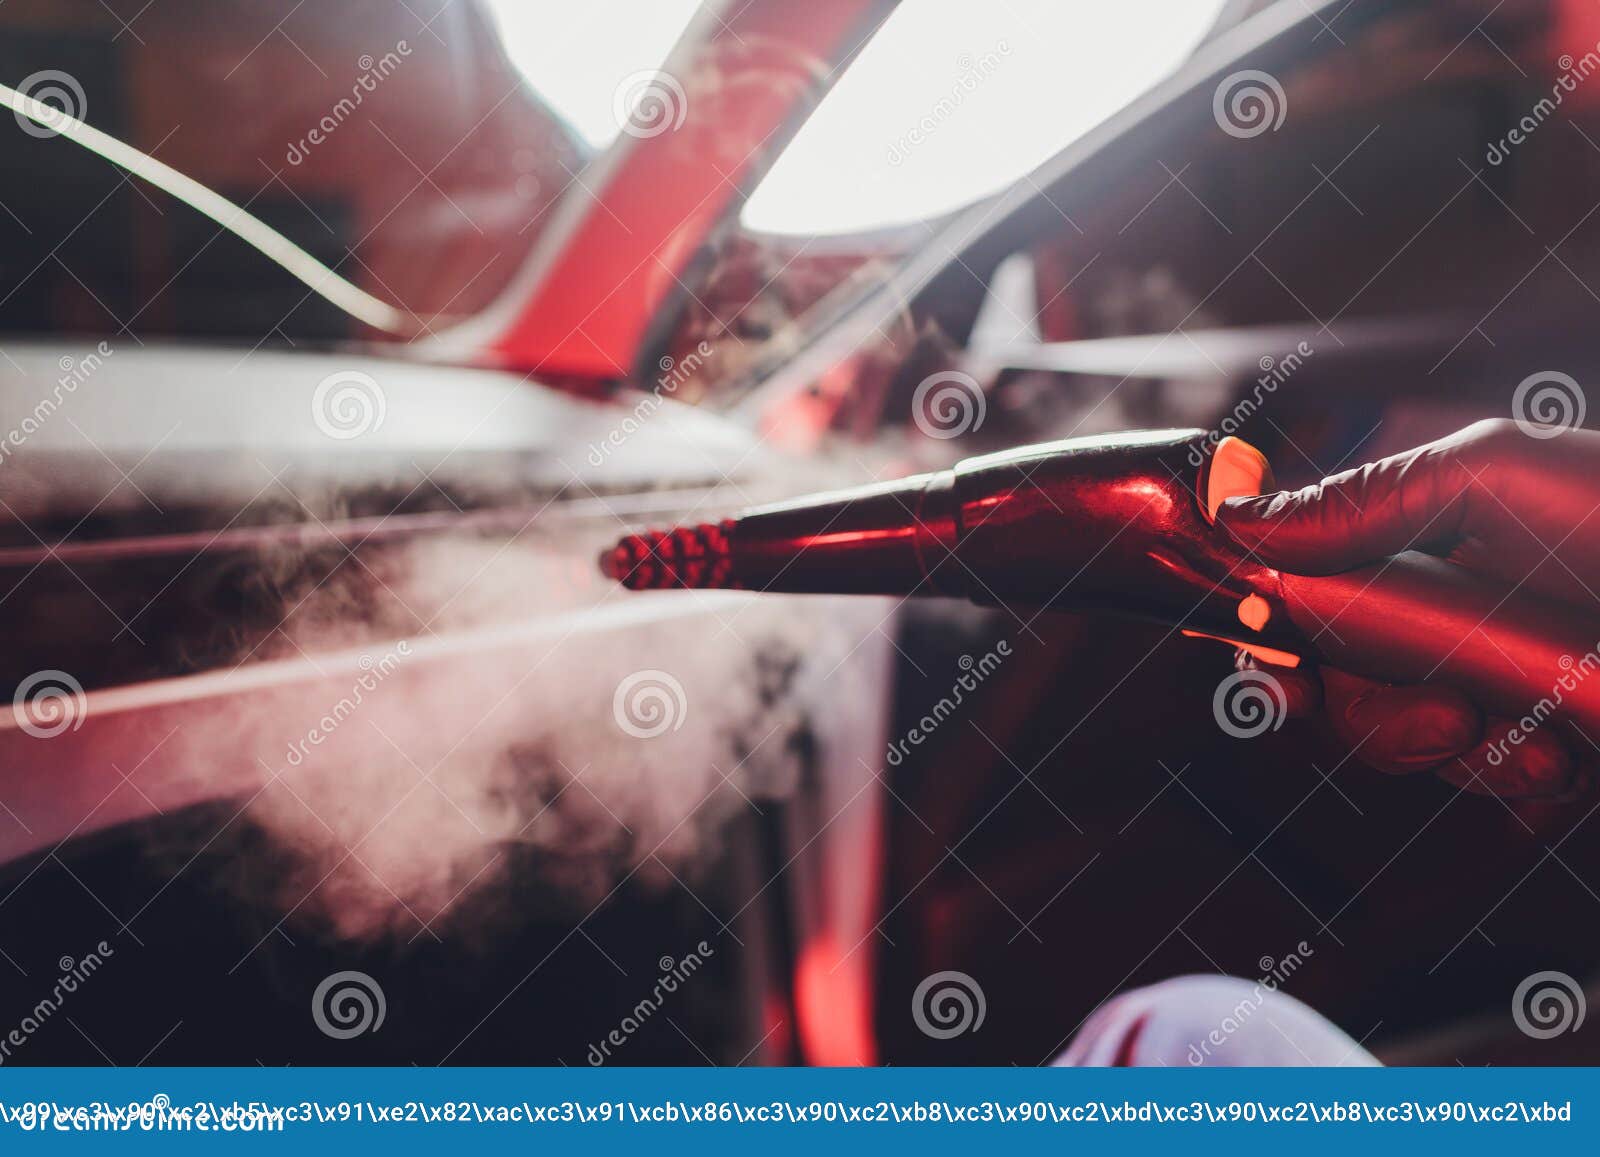 Portrait Of Worker Use Car Interior Steam Cleaner. Vapor Sterilization  Stock Photo, Picture and Royalty Free Image. Image 175110638.